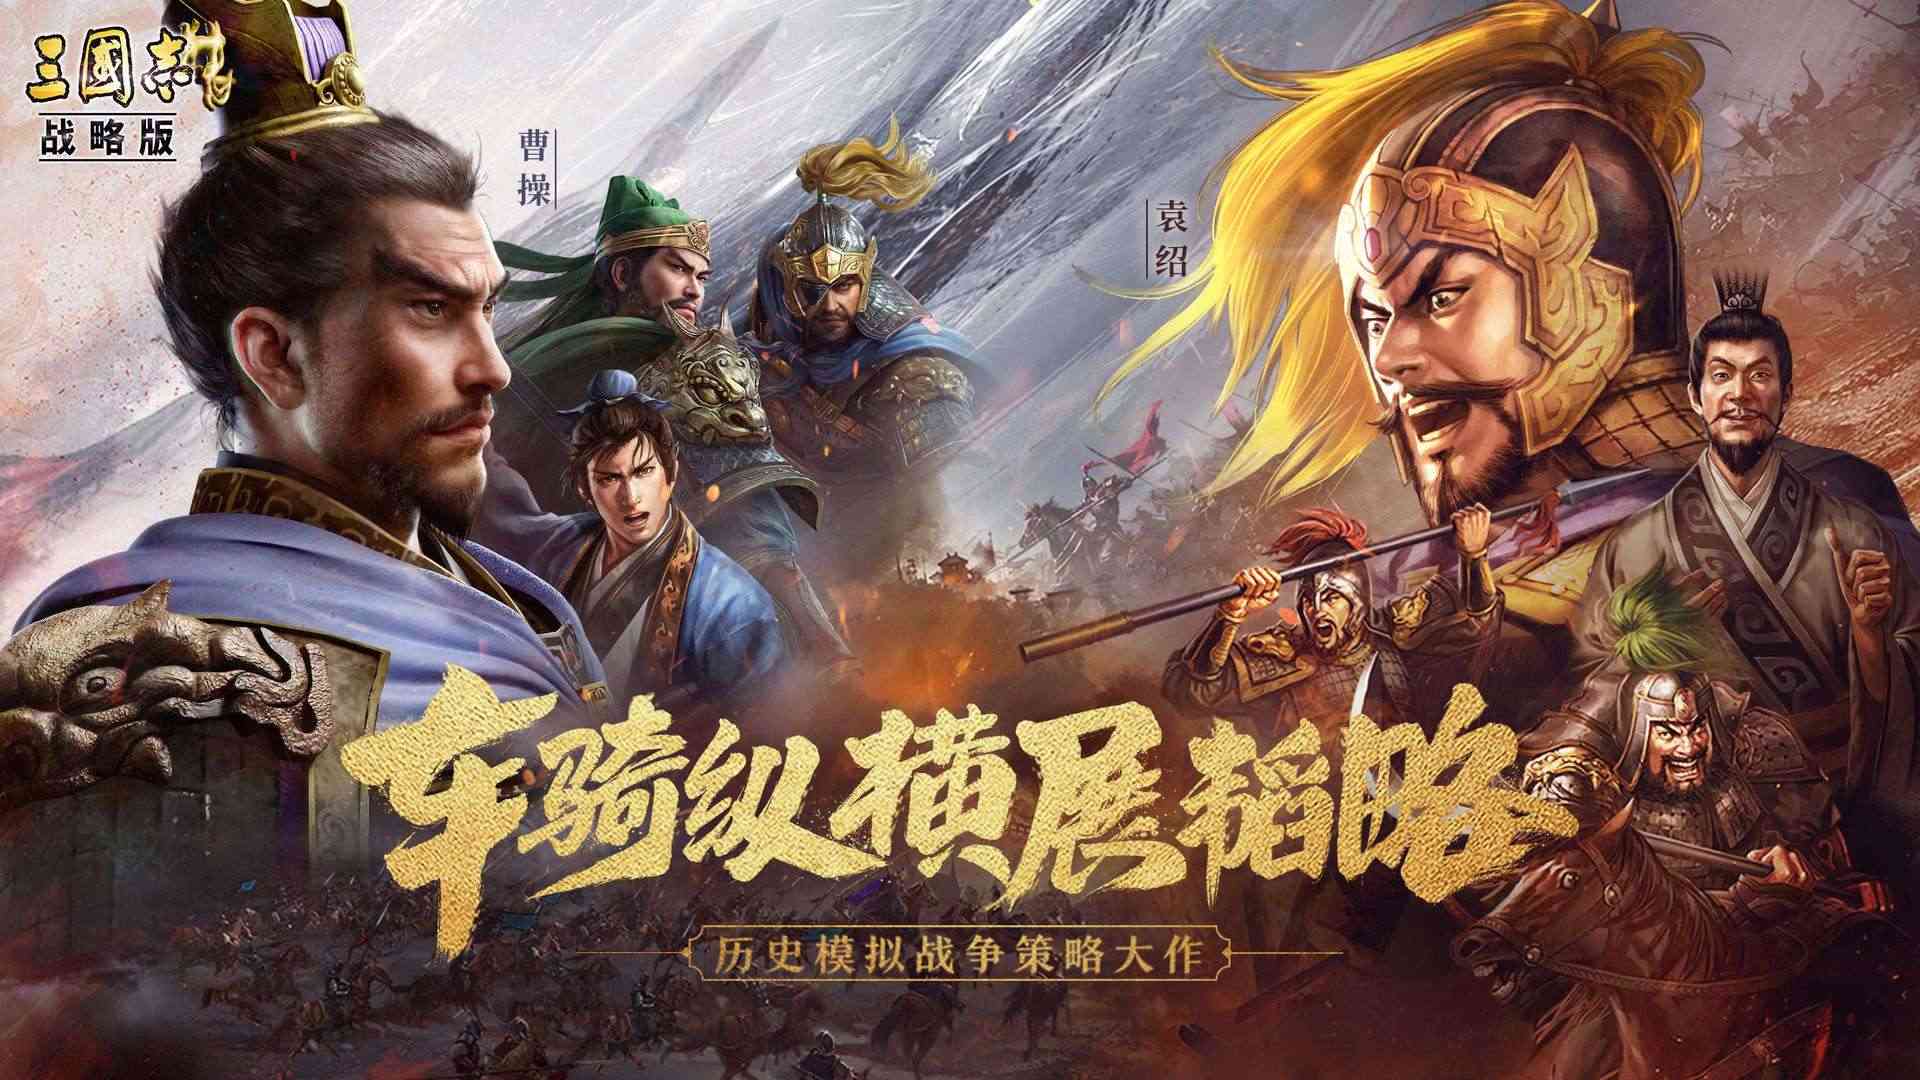 NetEase wins the case for the top Three Kingdoms game in China